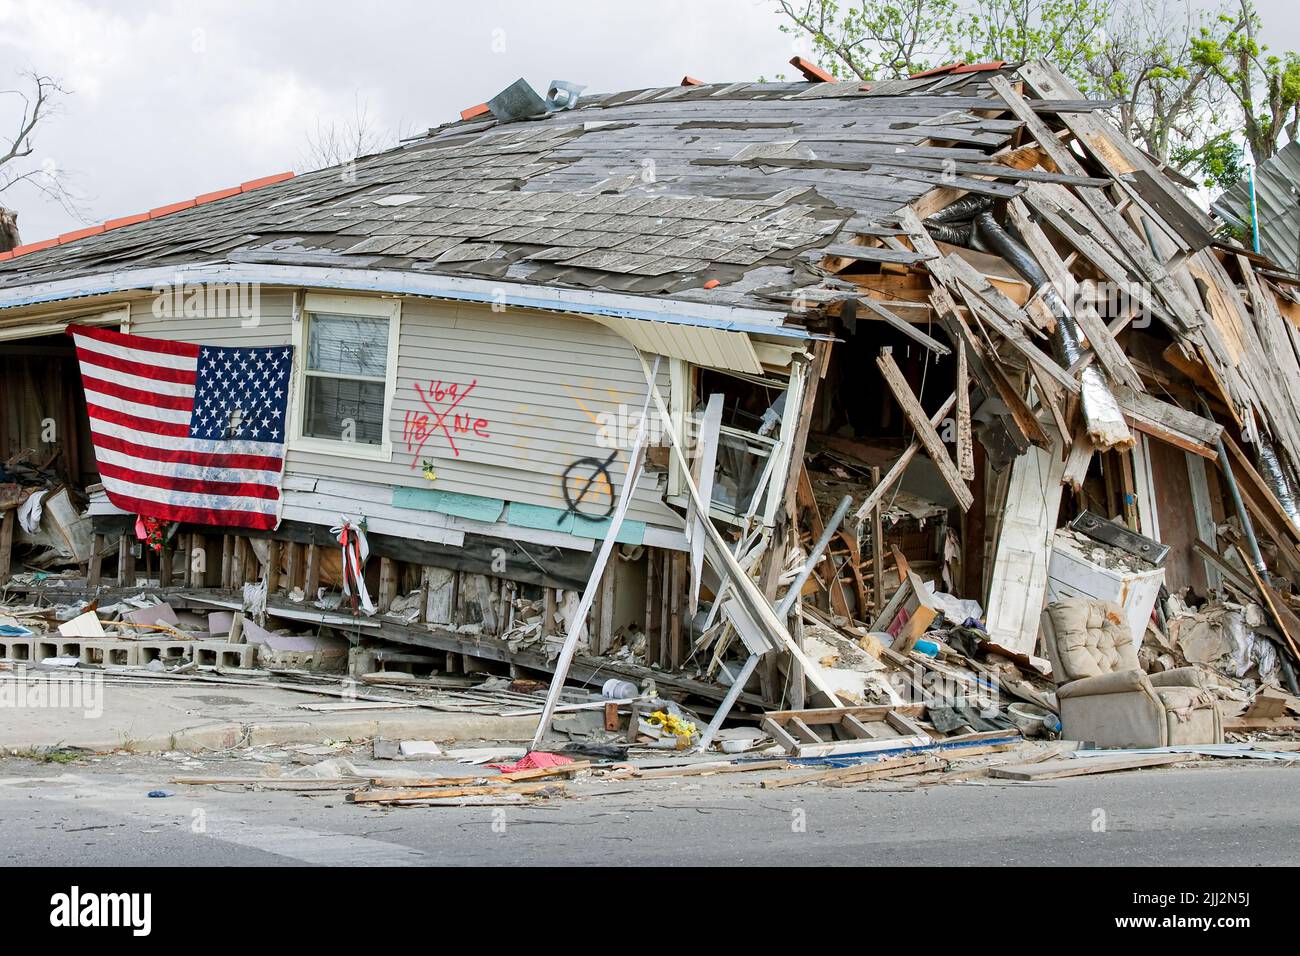 Damage in the Ninth Ward of New Orleans, Louisiana, from Hurricane Katrina, a Category 5 storm that wreaked havoc on the U.S. Gulf Coast in August 2005. (USA) Stock Photo